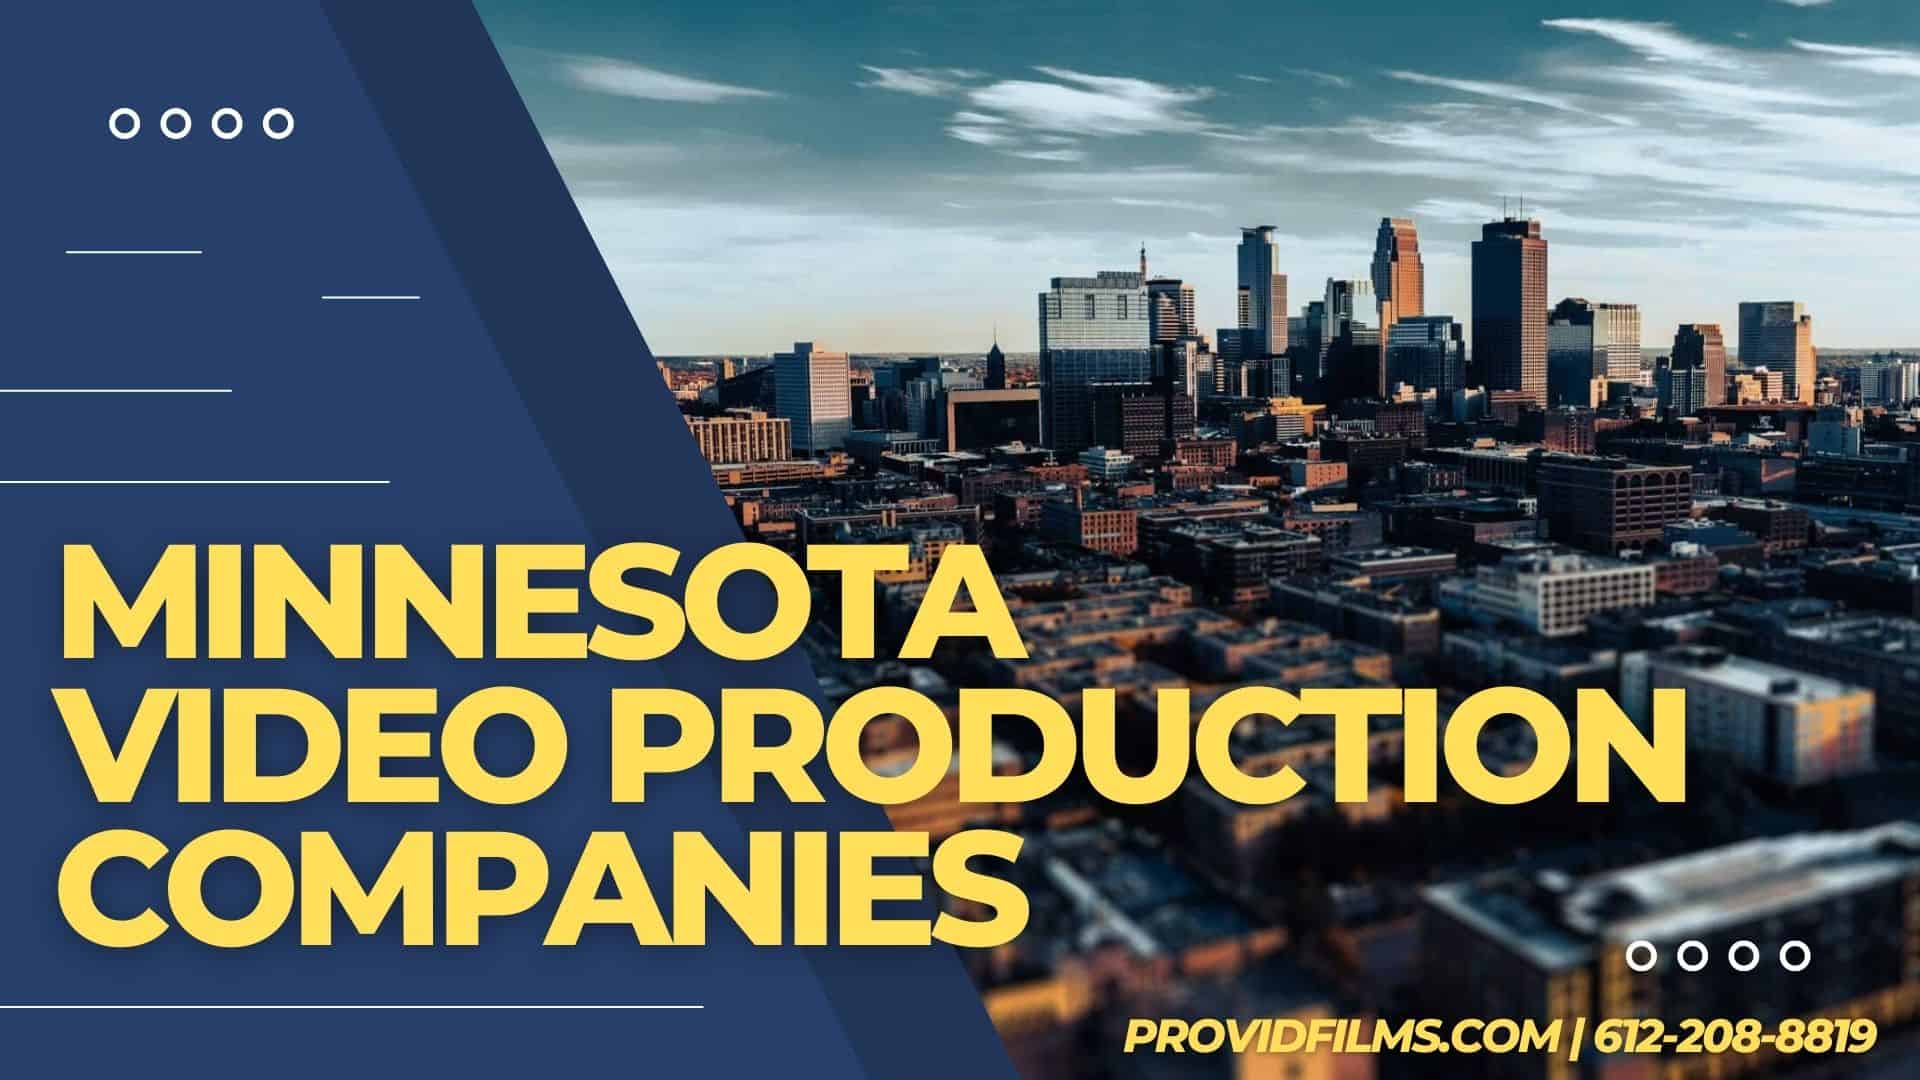 Graphic of Buildings in Minnesota with the text saying "Minnesota Video Production Companies"